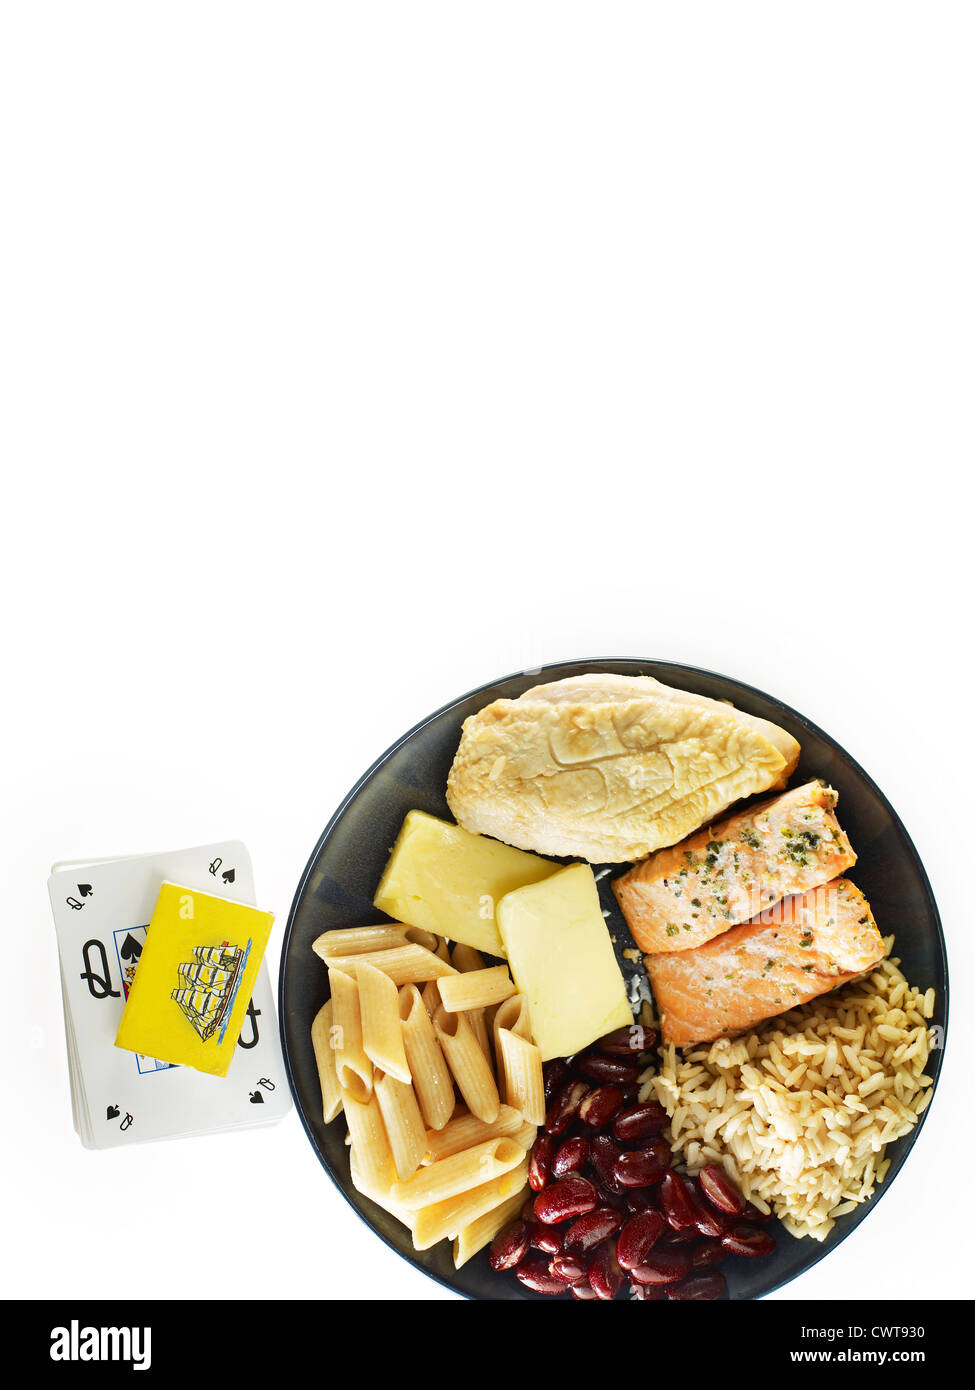 Plate of food next to matches and cards Stock Photo